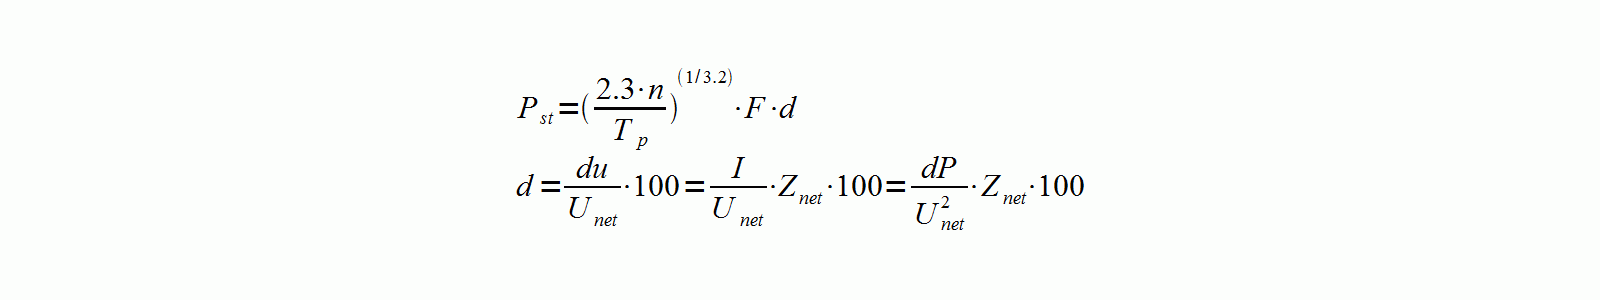 Approximation formulas for the estimation of flicker measurements